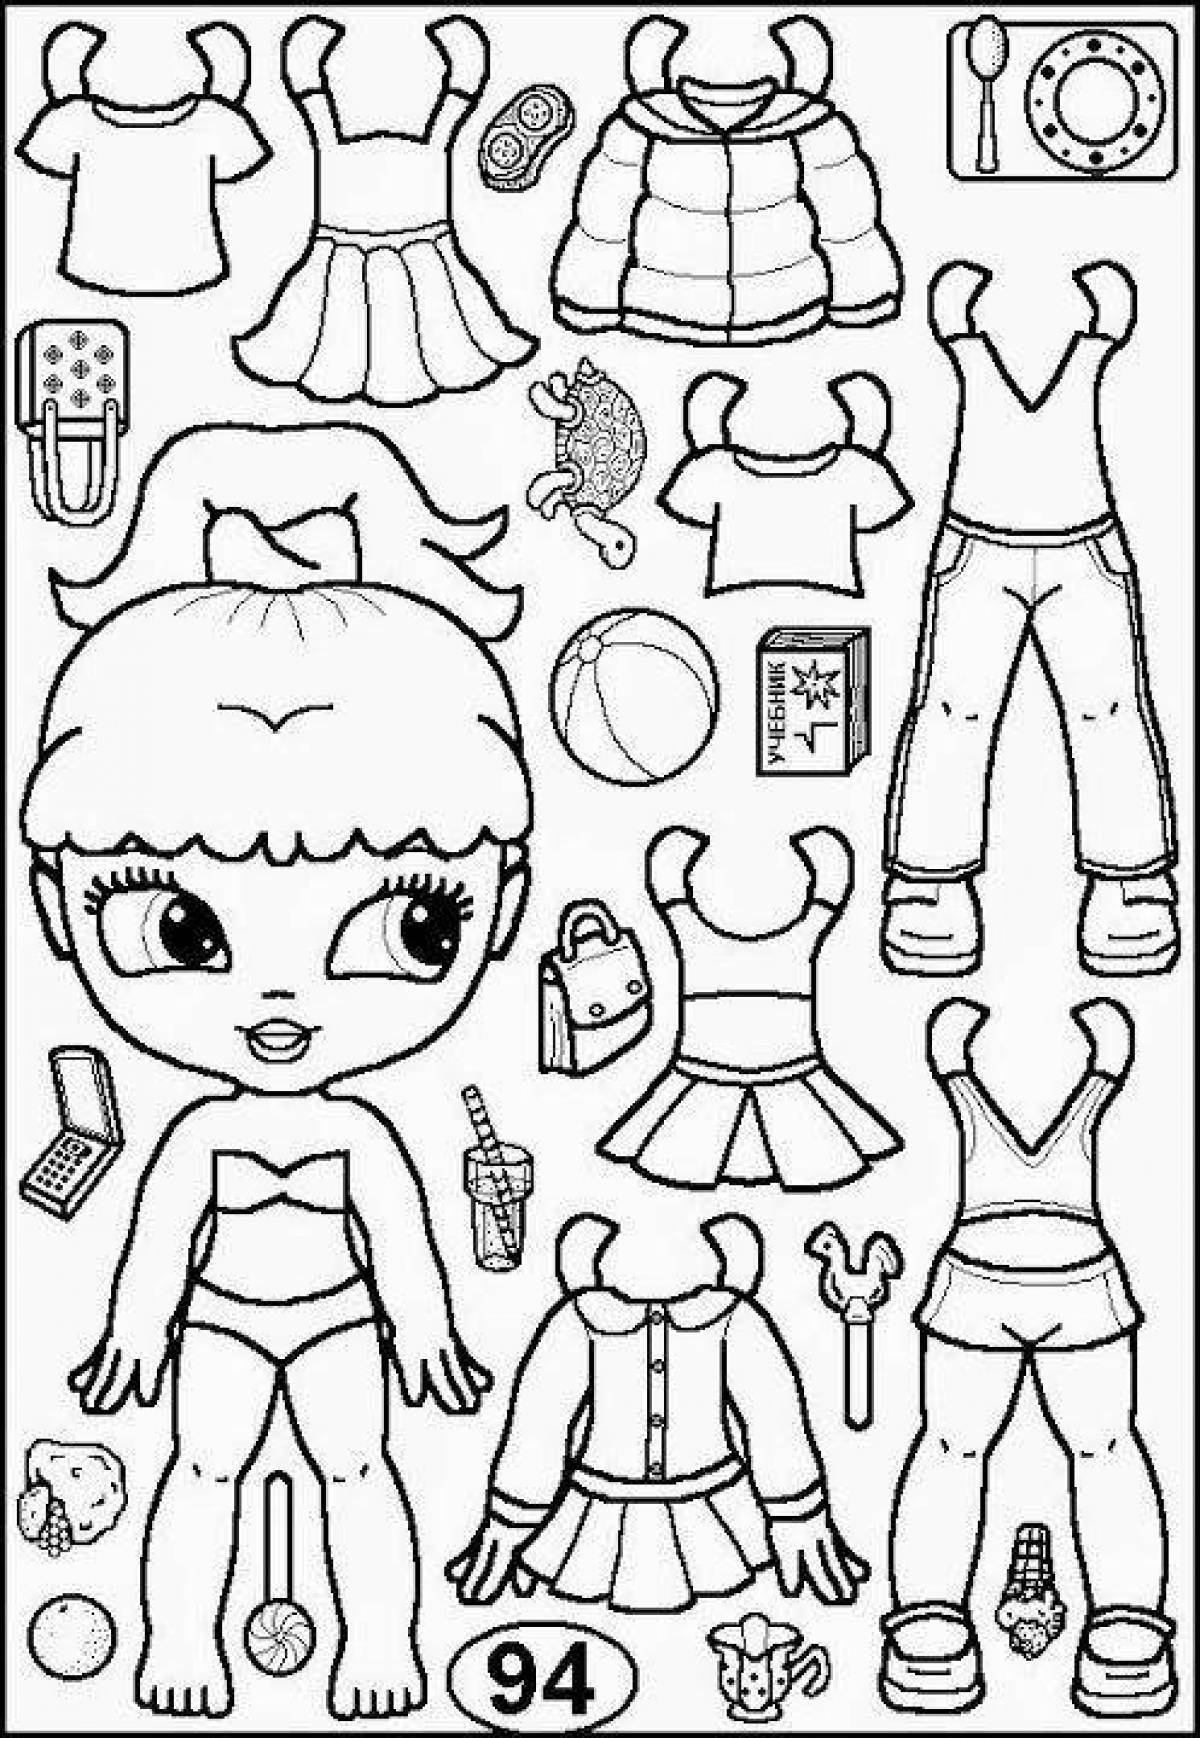 Unique lol doll coloring with clothes cut out